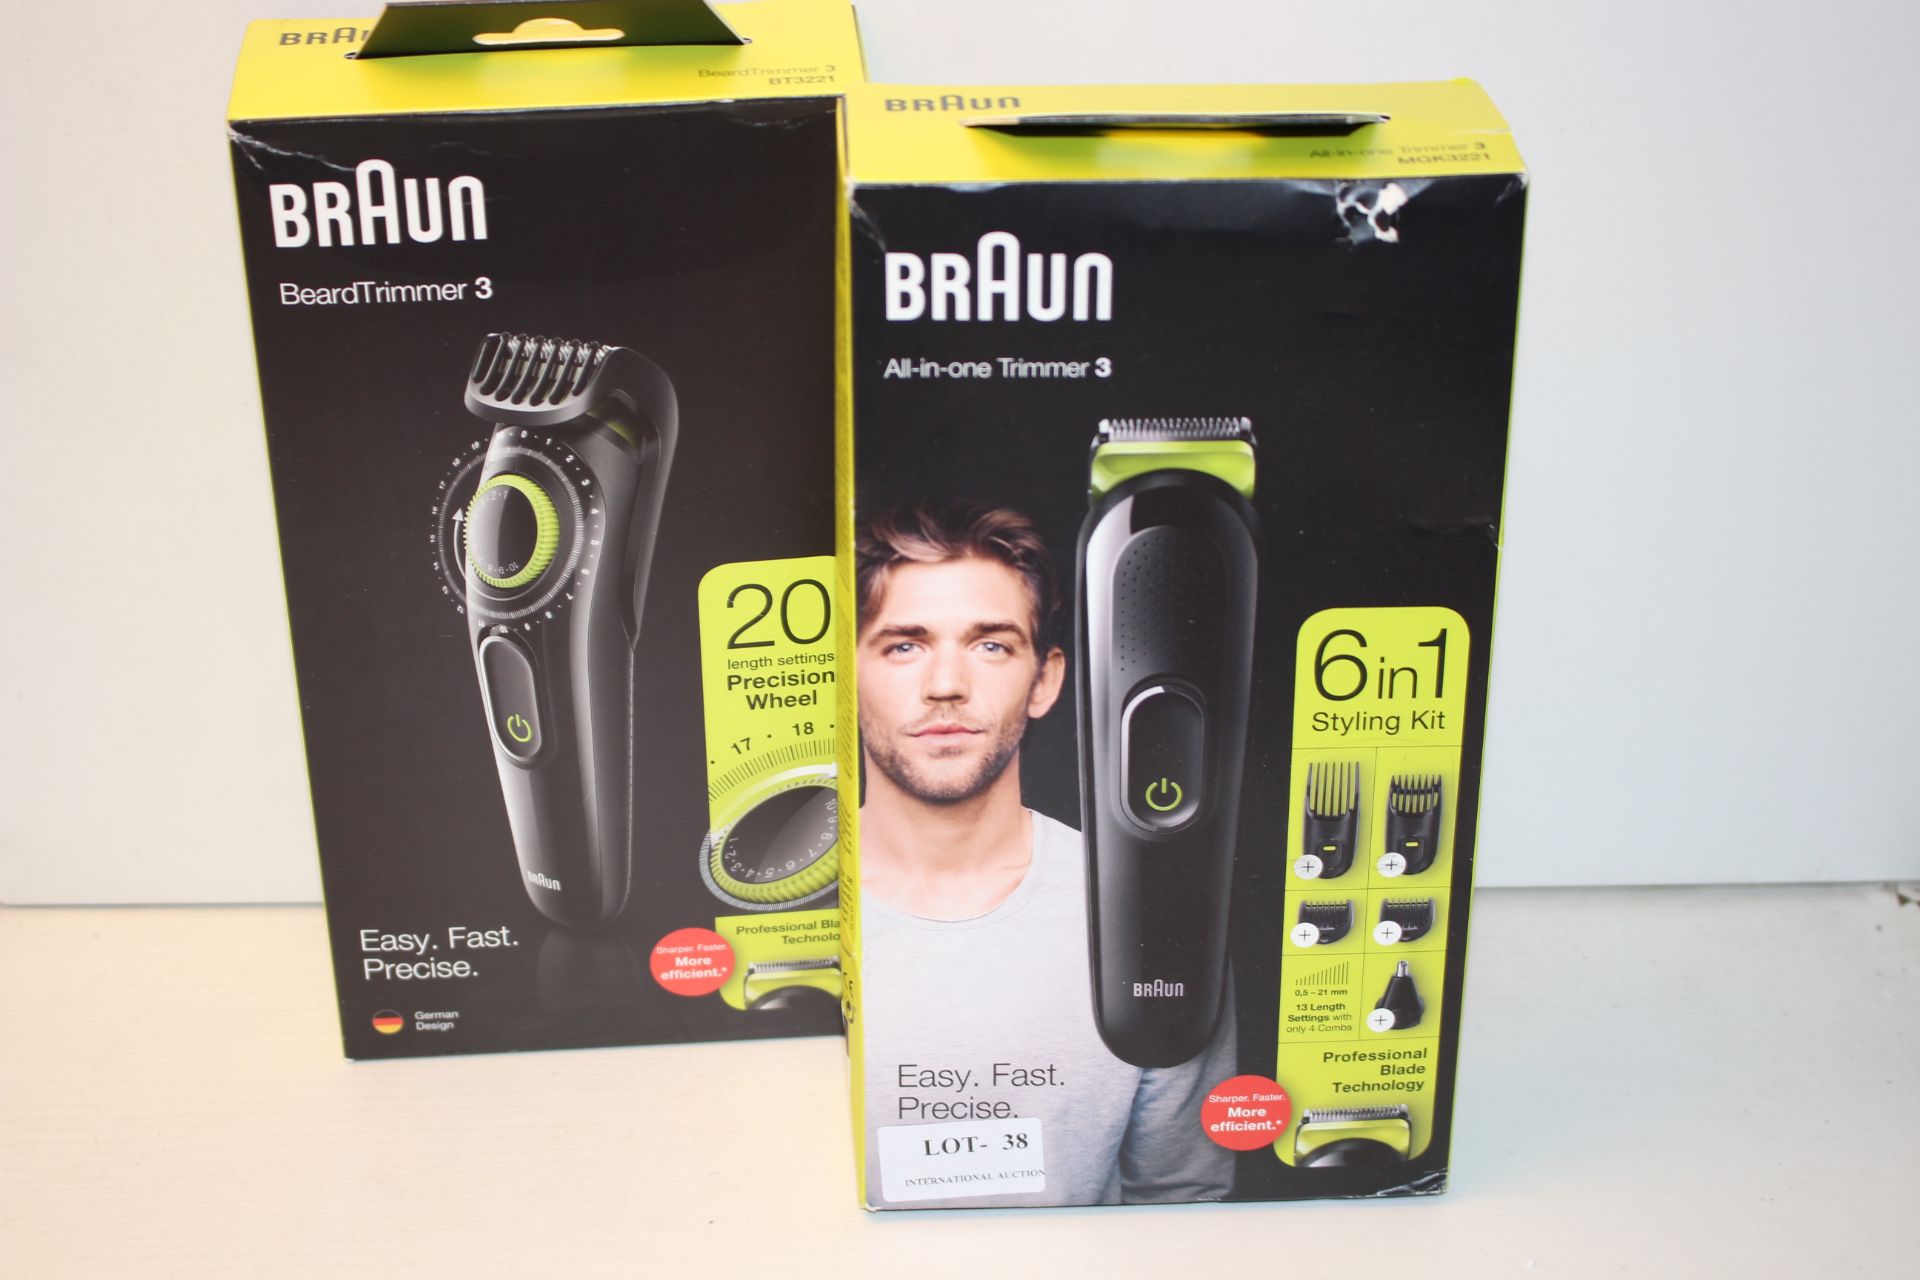 2X BOXED BRAUN ALL-IN-ONE TRIMMER 3 6-IN-1 STYLING KITS MGK3221 RRP £44.95 EACHCondition